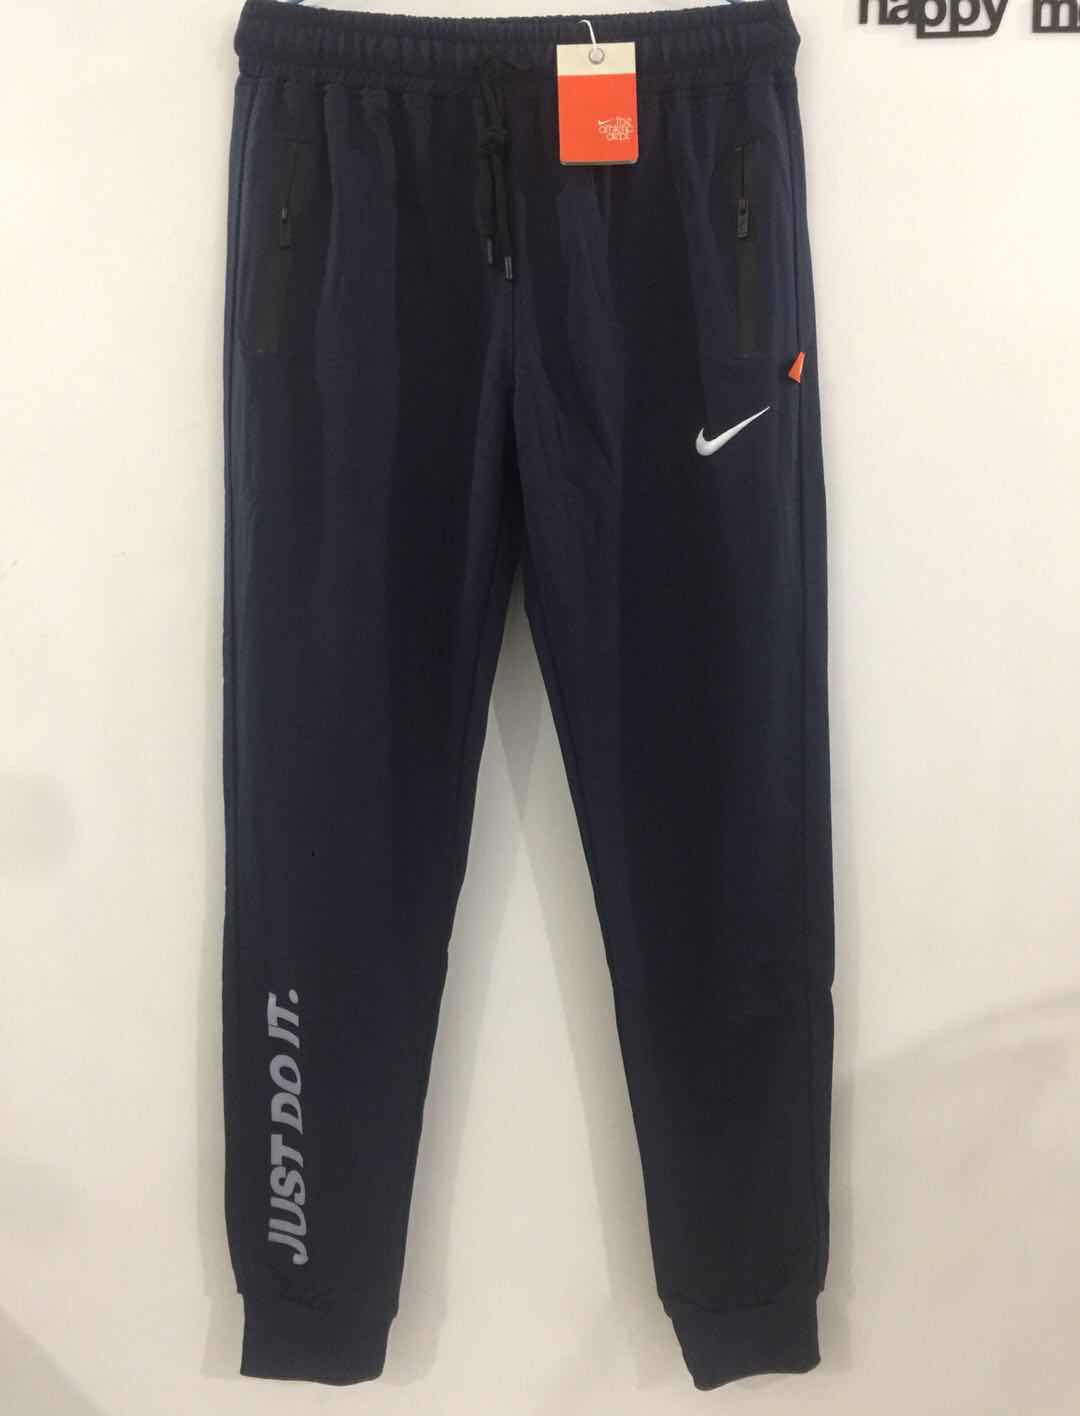 Nike men's pants new running training and fitness pants in autumn wear-resistant comfortable casual knitting closed leg pants